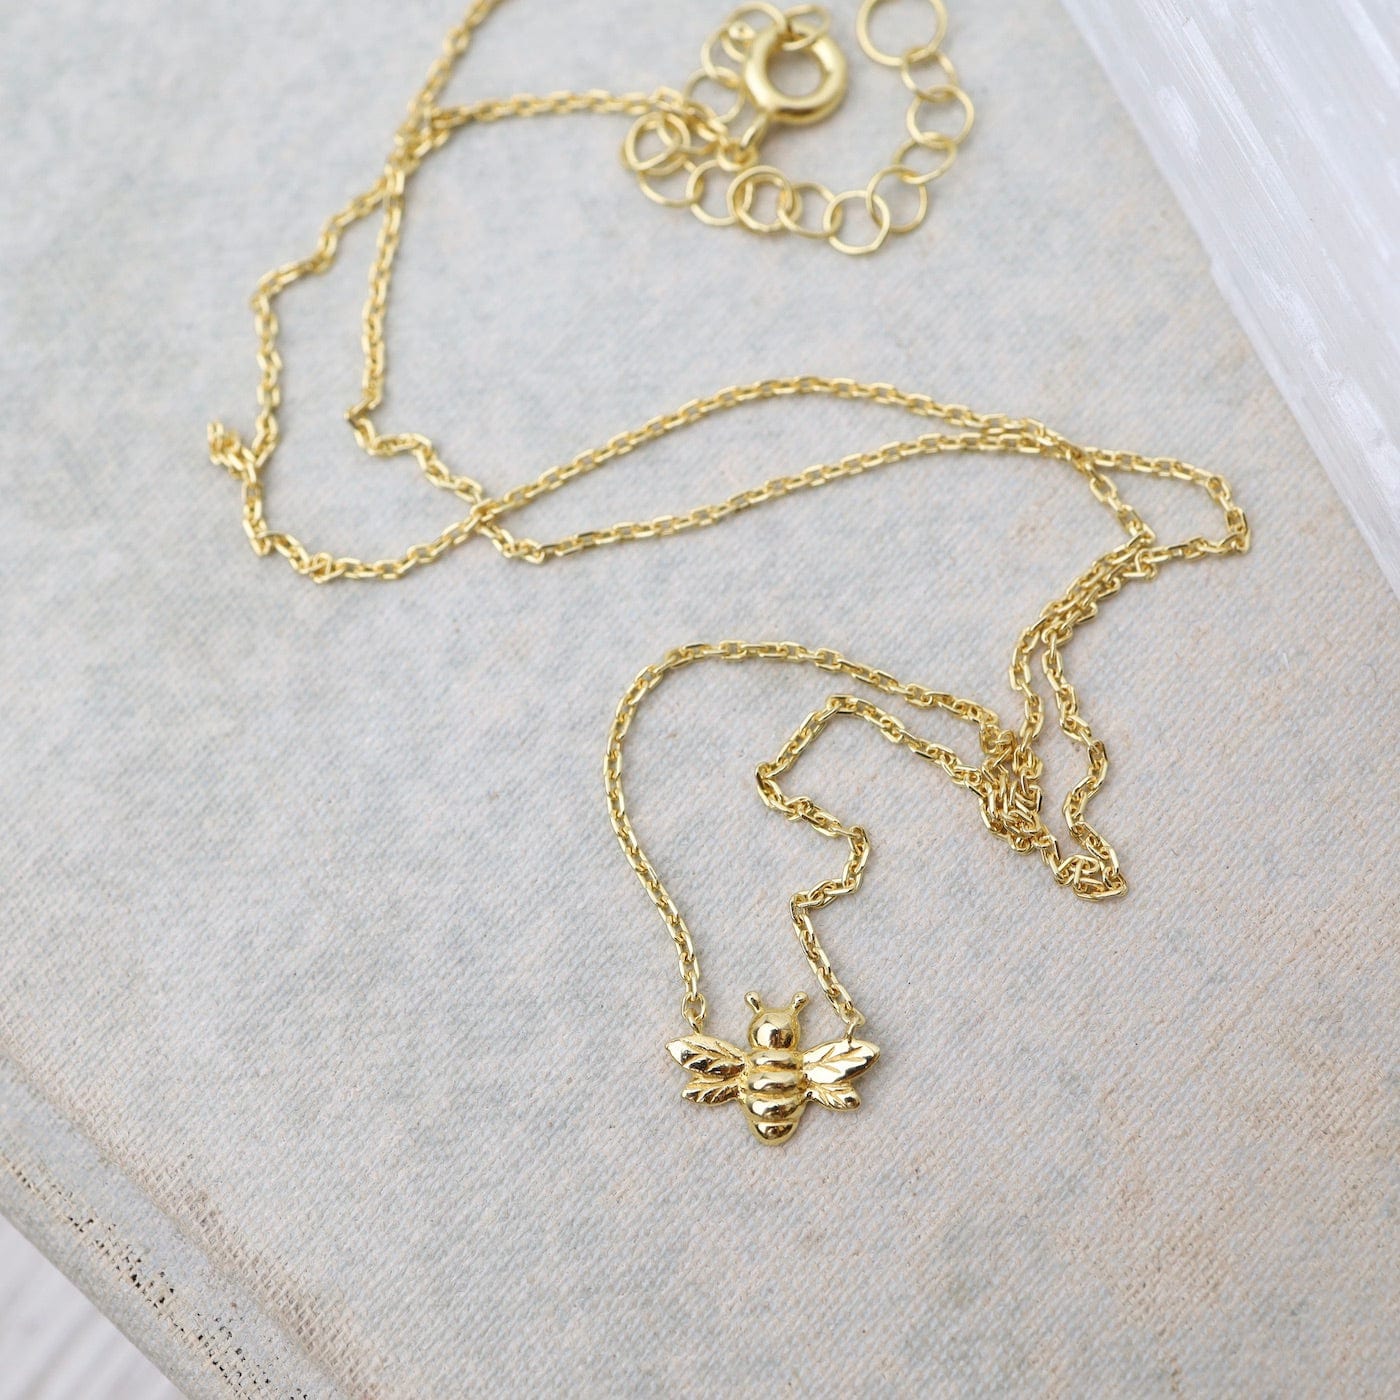 NKL-VRM Small Bee Necklace - Gold Vermeil